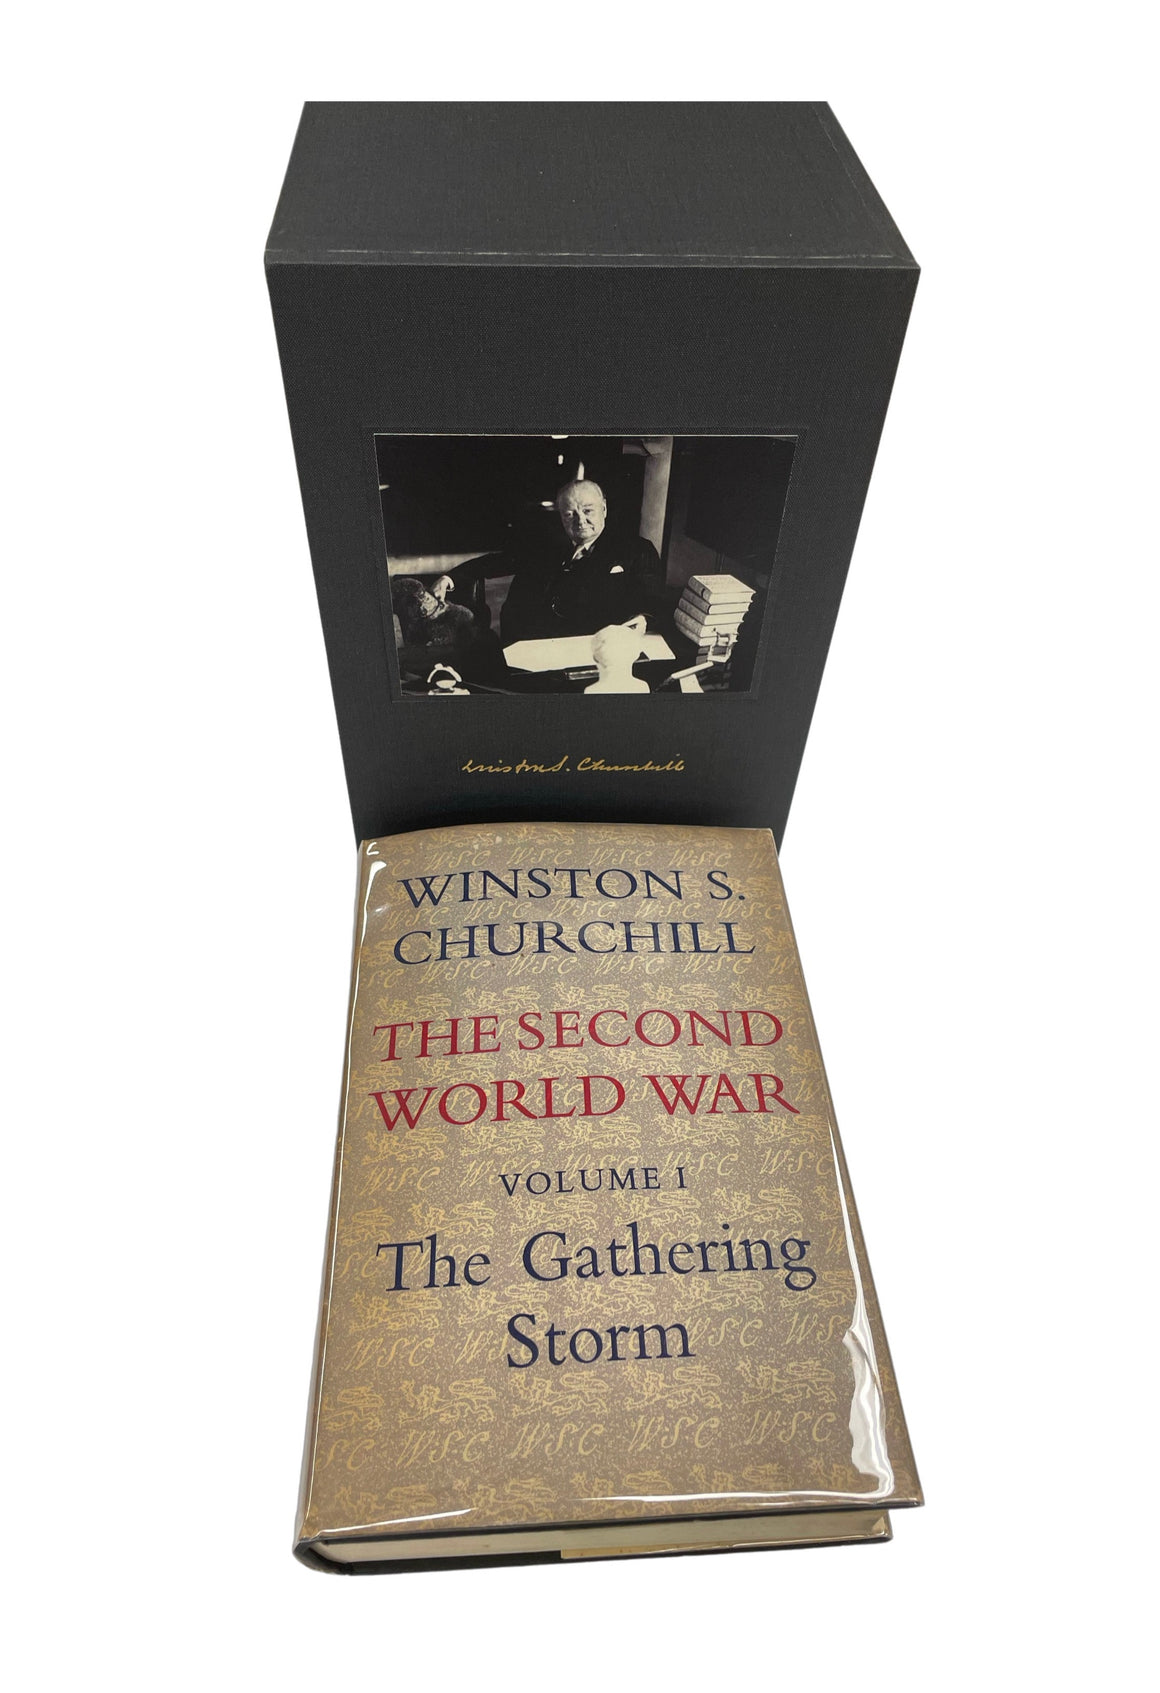 The Second World War by Winston Churchill, First Edition, Six Volume Set, in Original Dust Jackets, 1948-1954